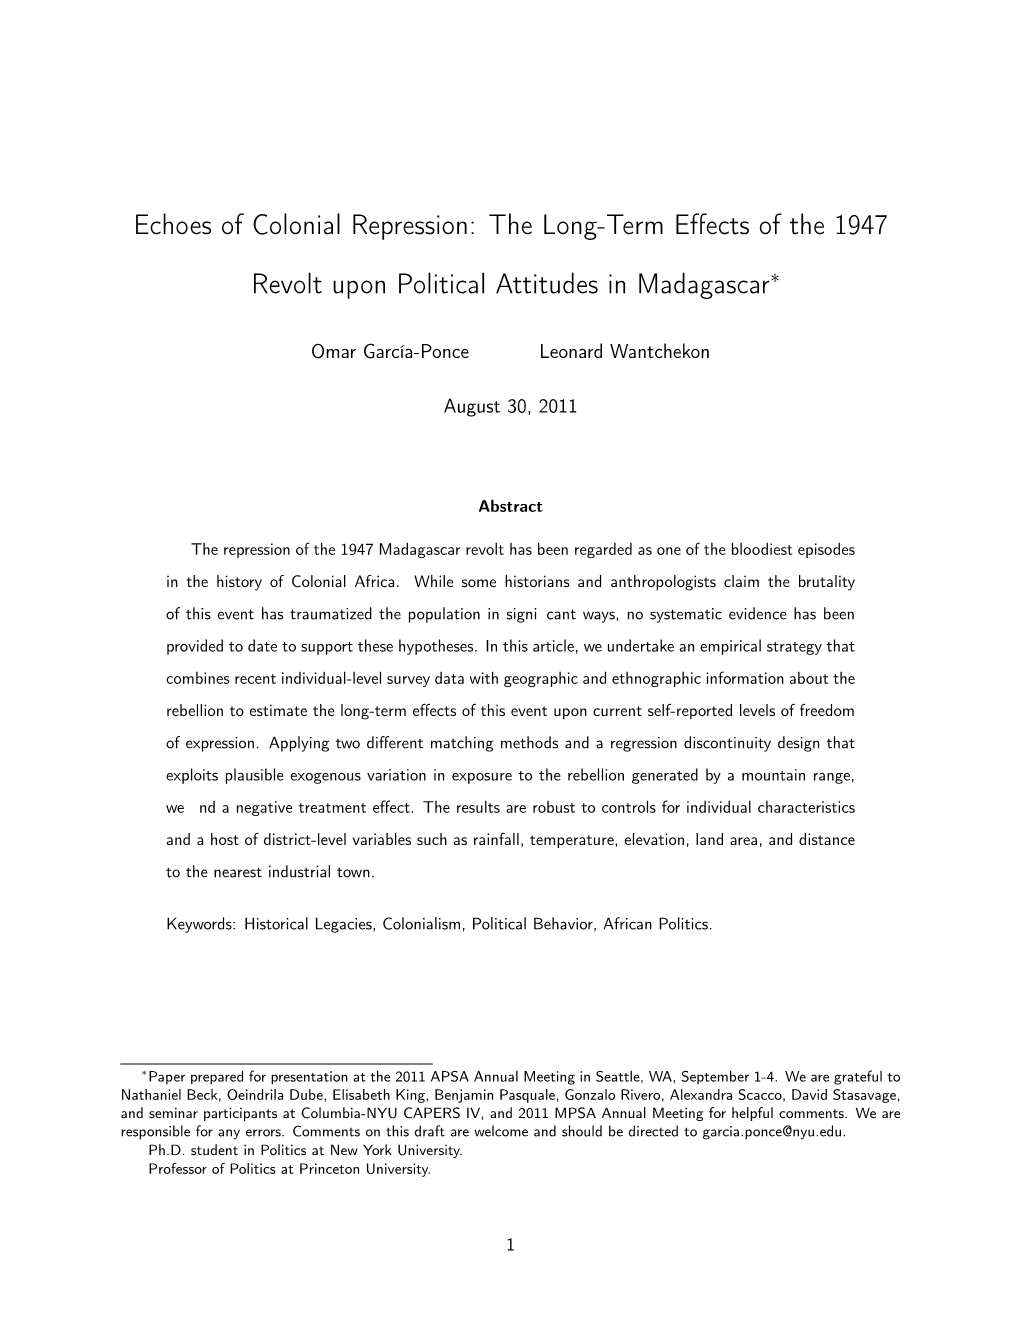 Echoes of Colonial Repression: the Long-Term Effects of the 1947